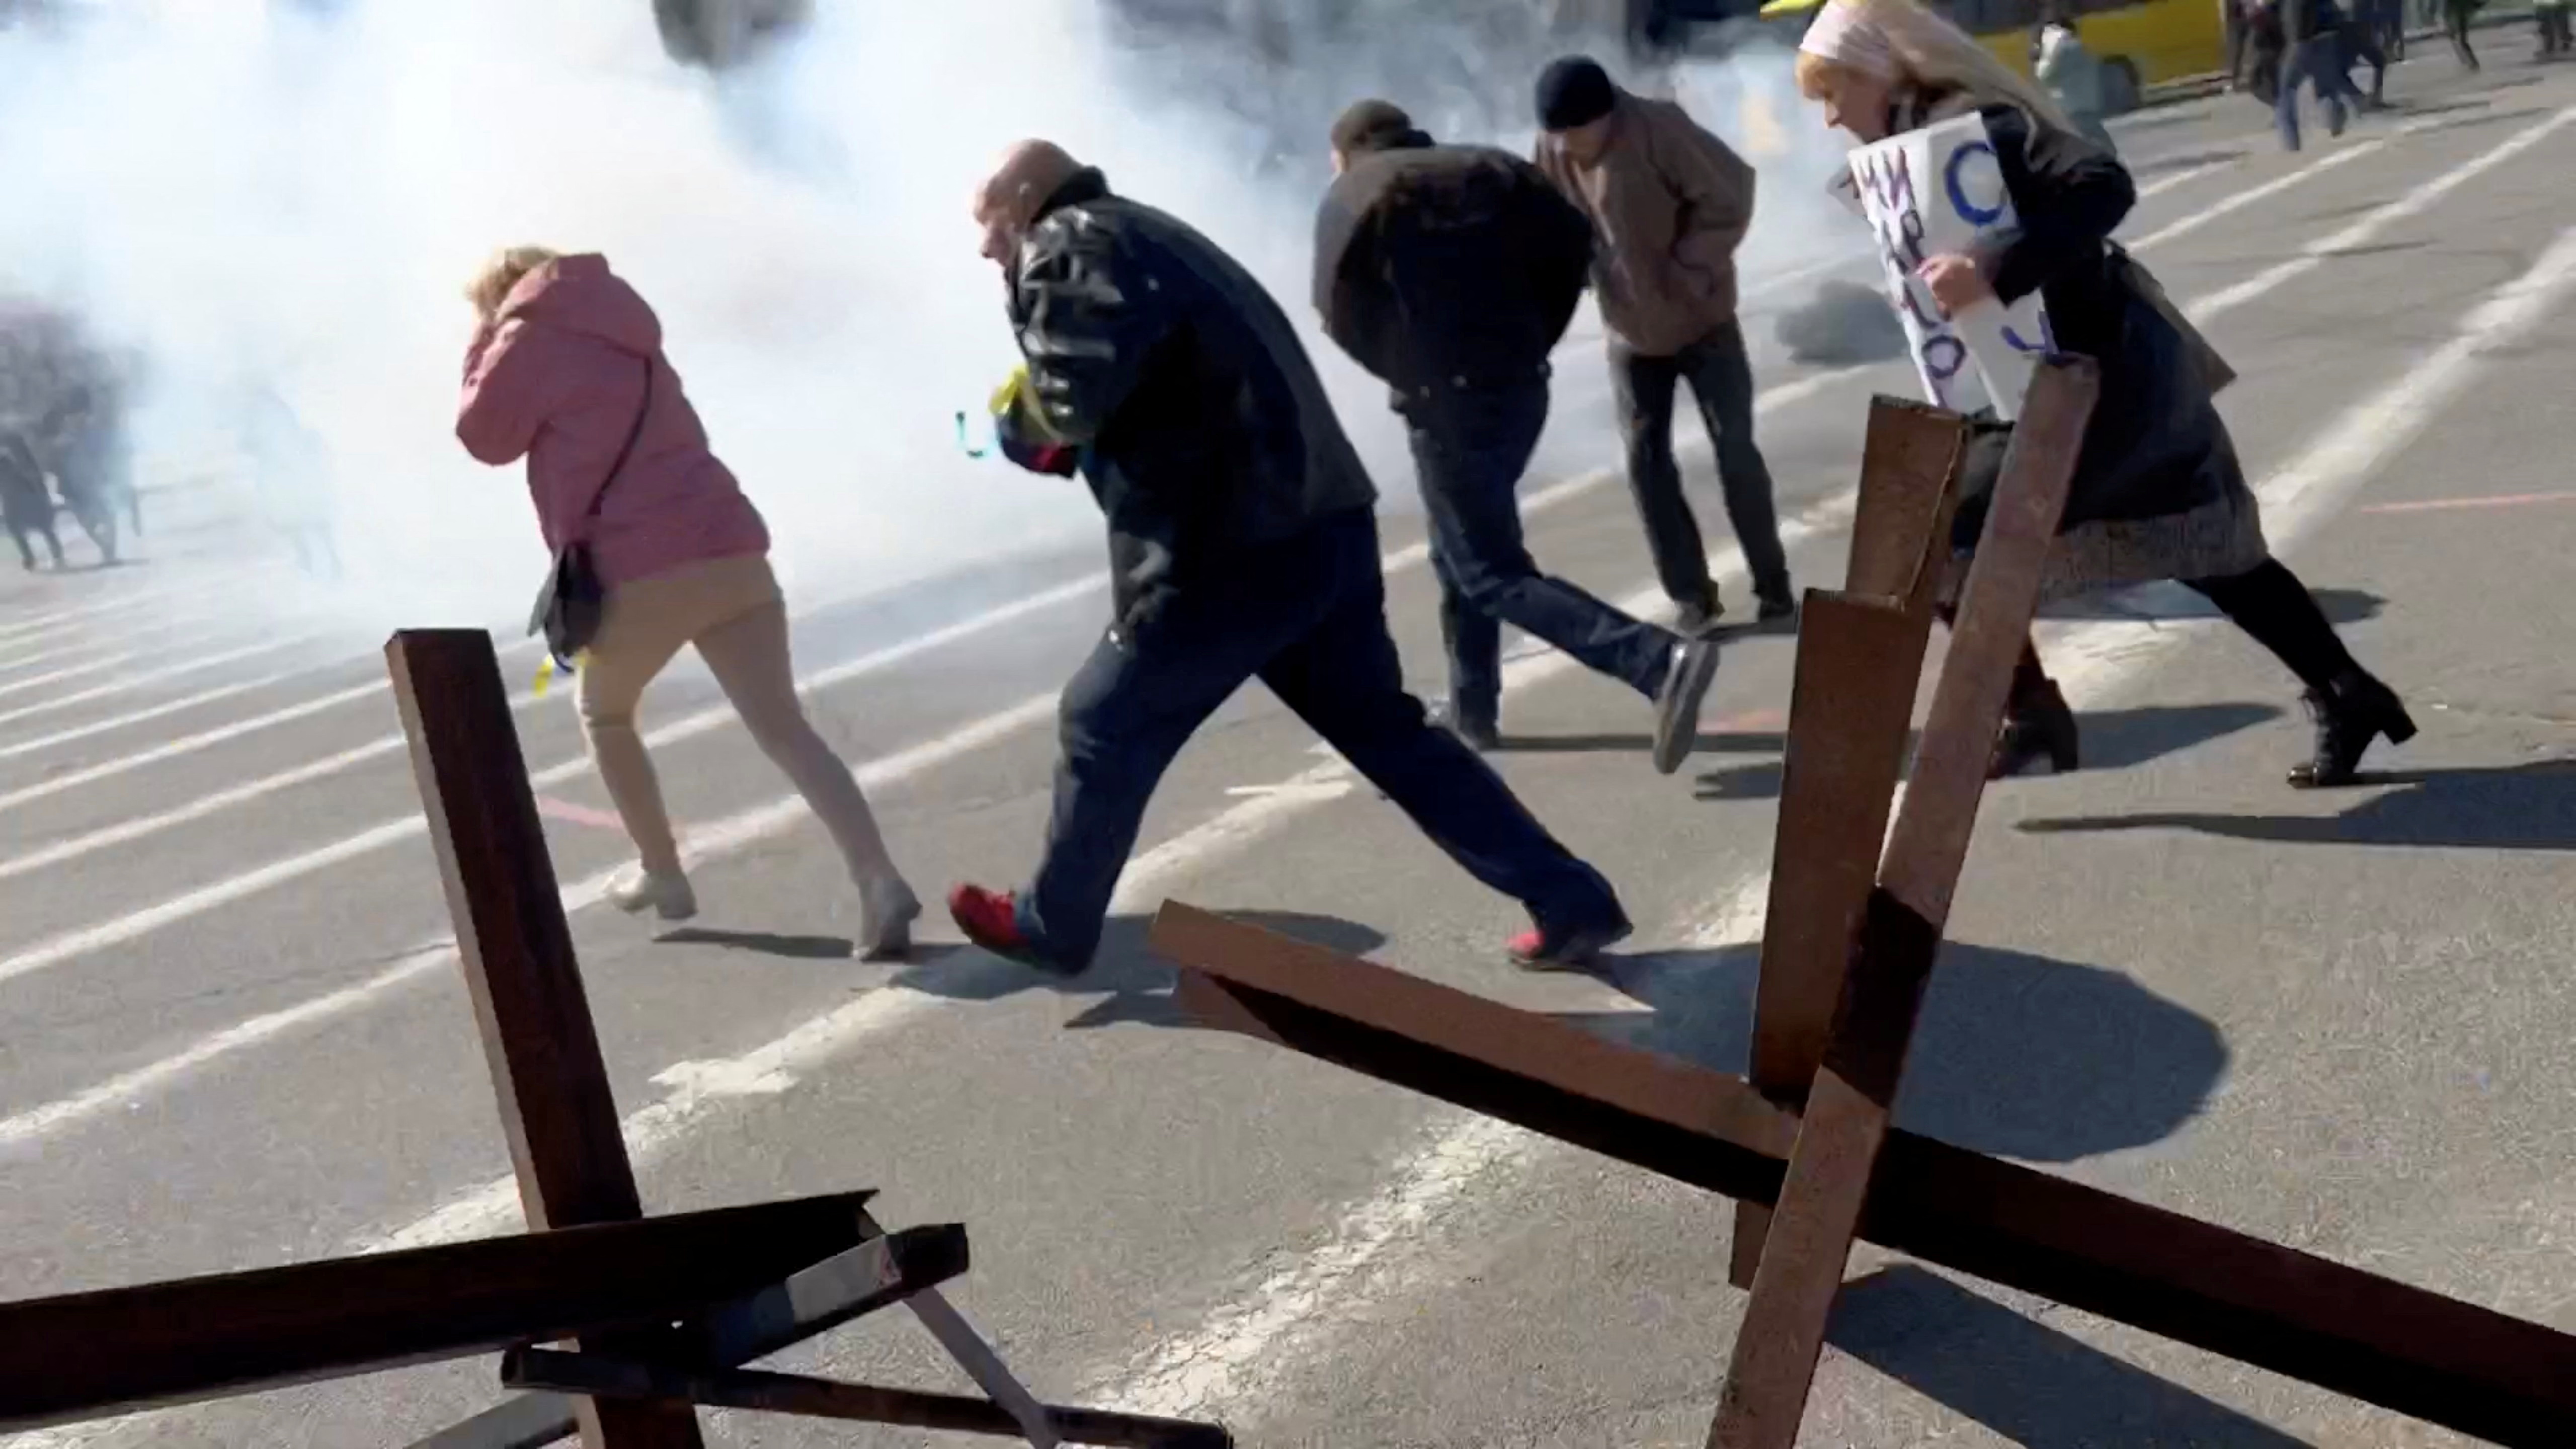 Ukraine says Russian troops violently dispersed Kherson anti-occupation rally